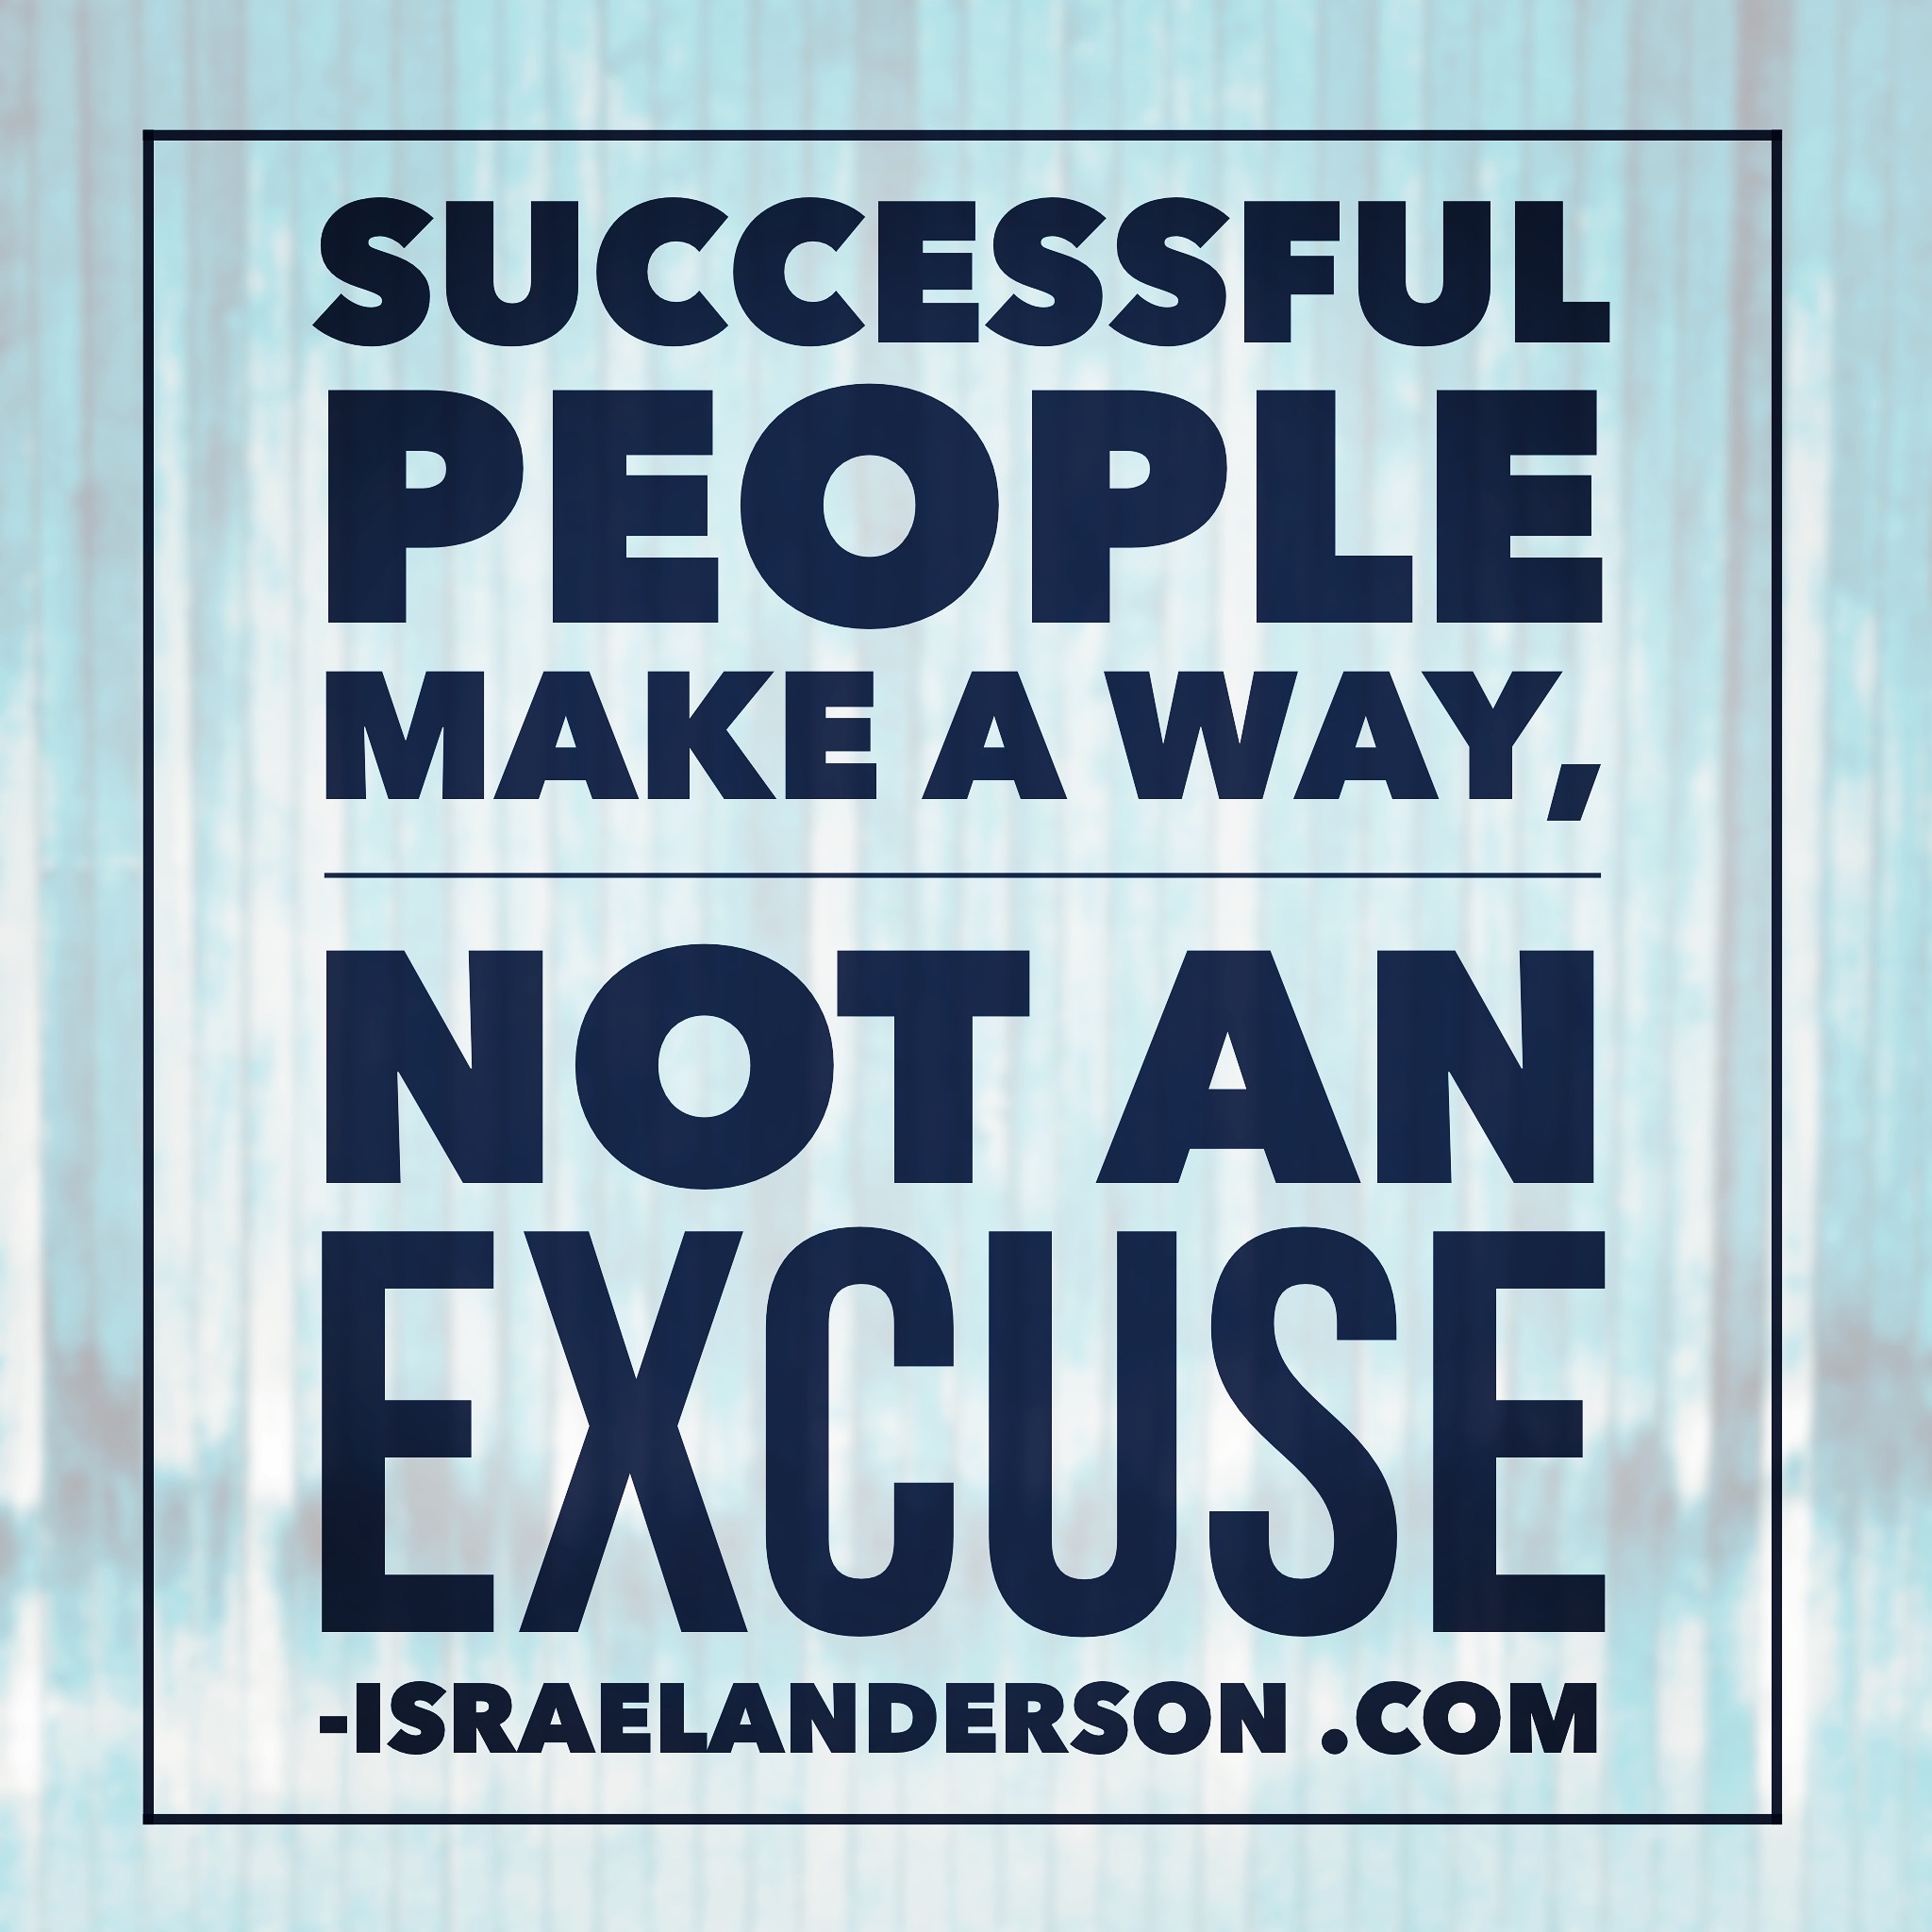 Successful people make a way, not an excuse.